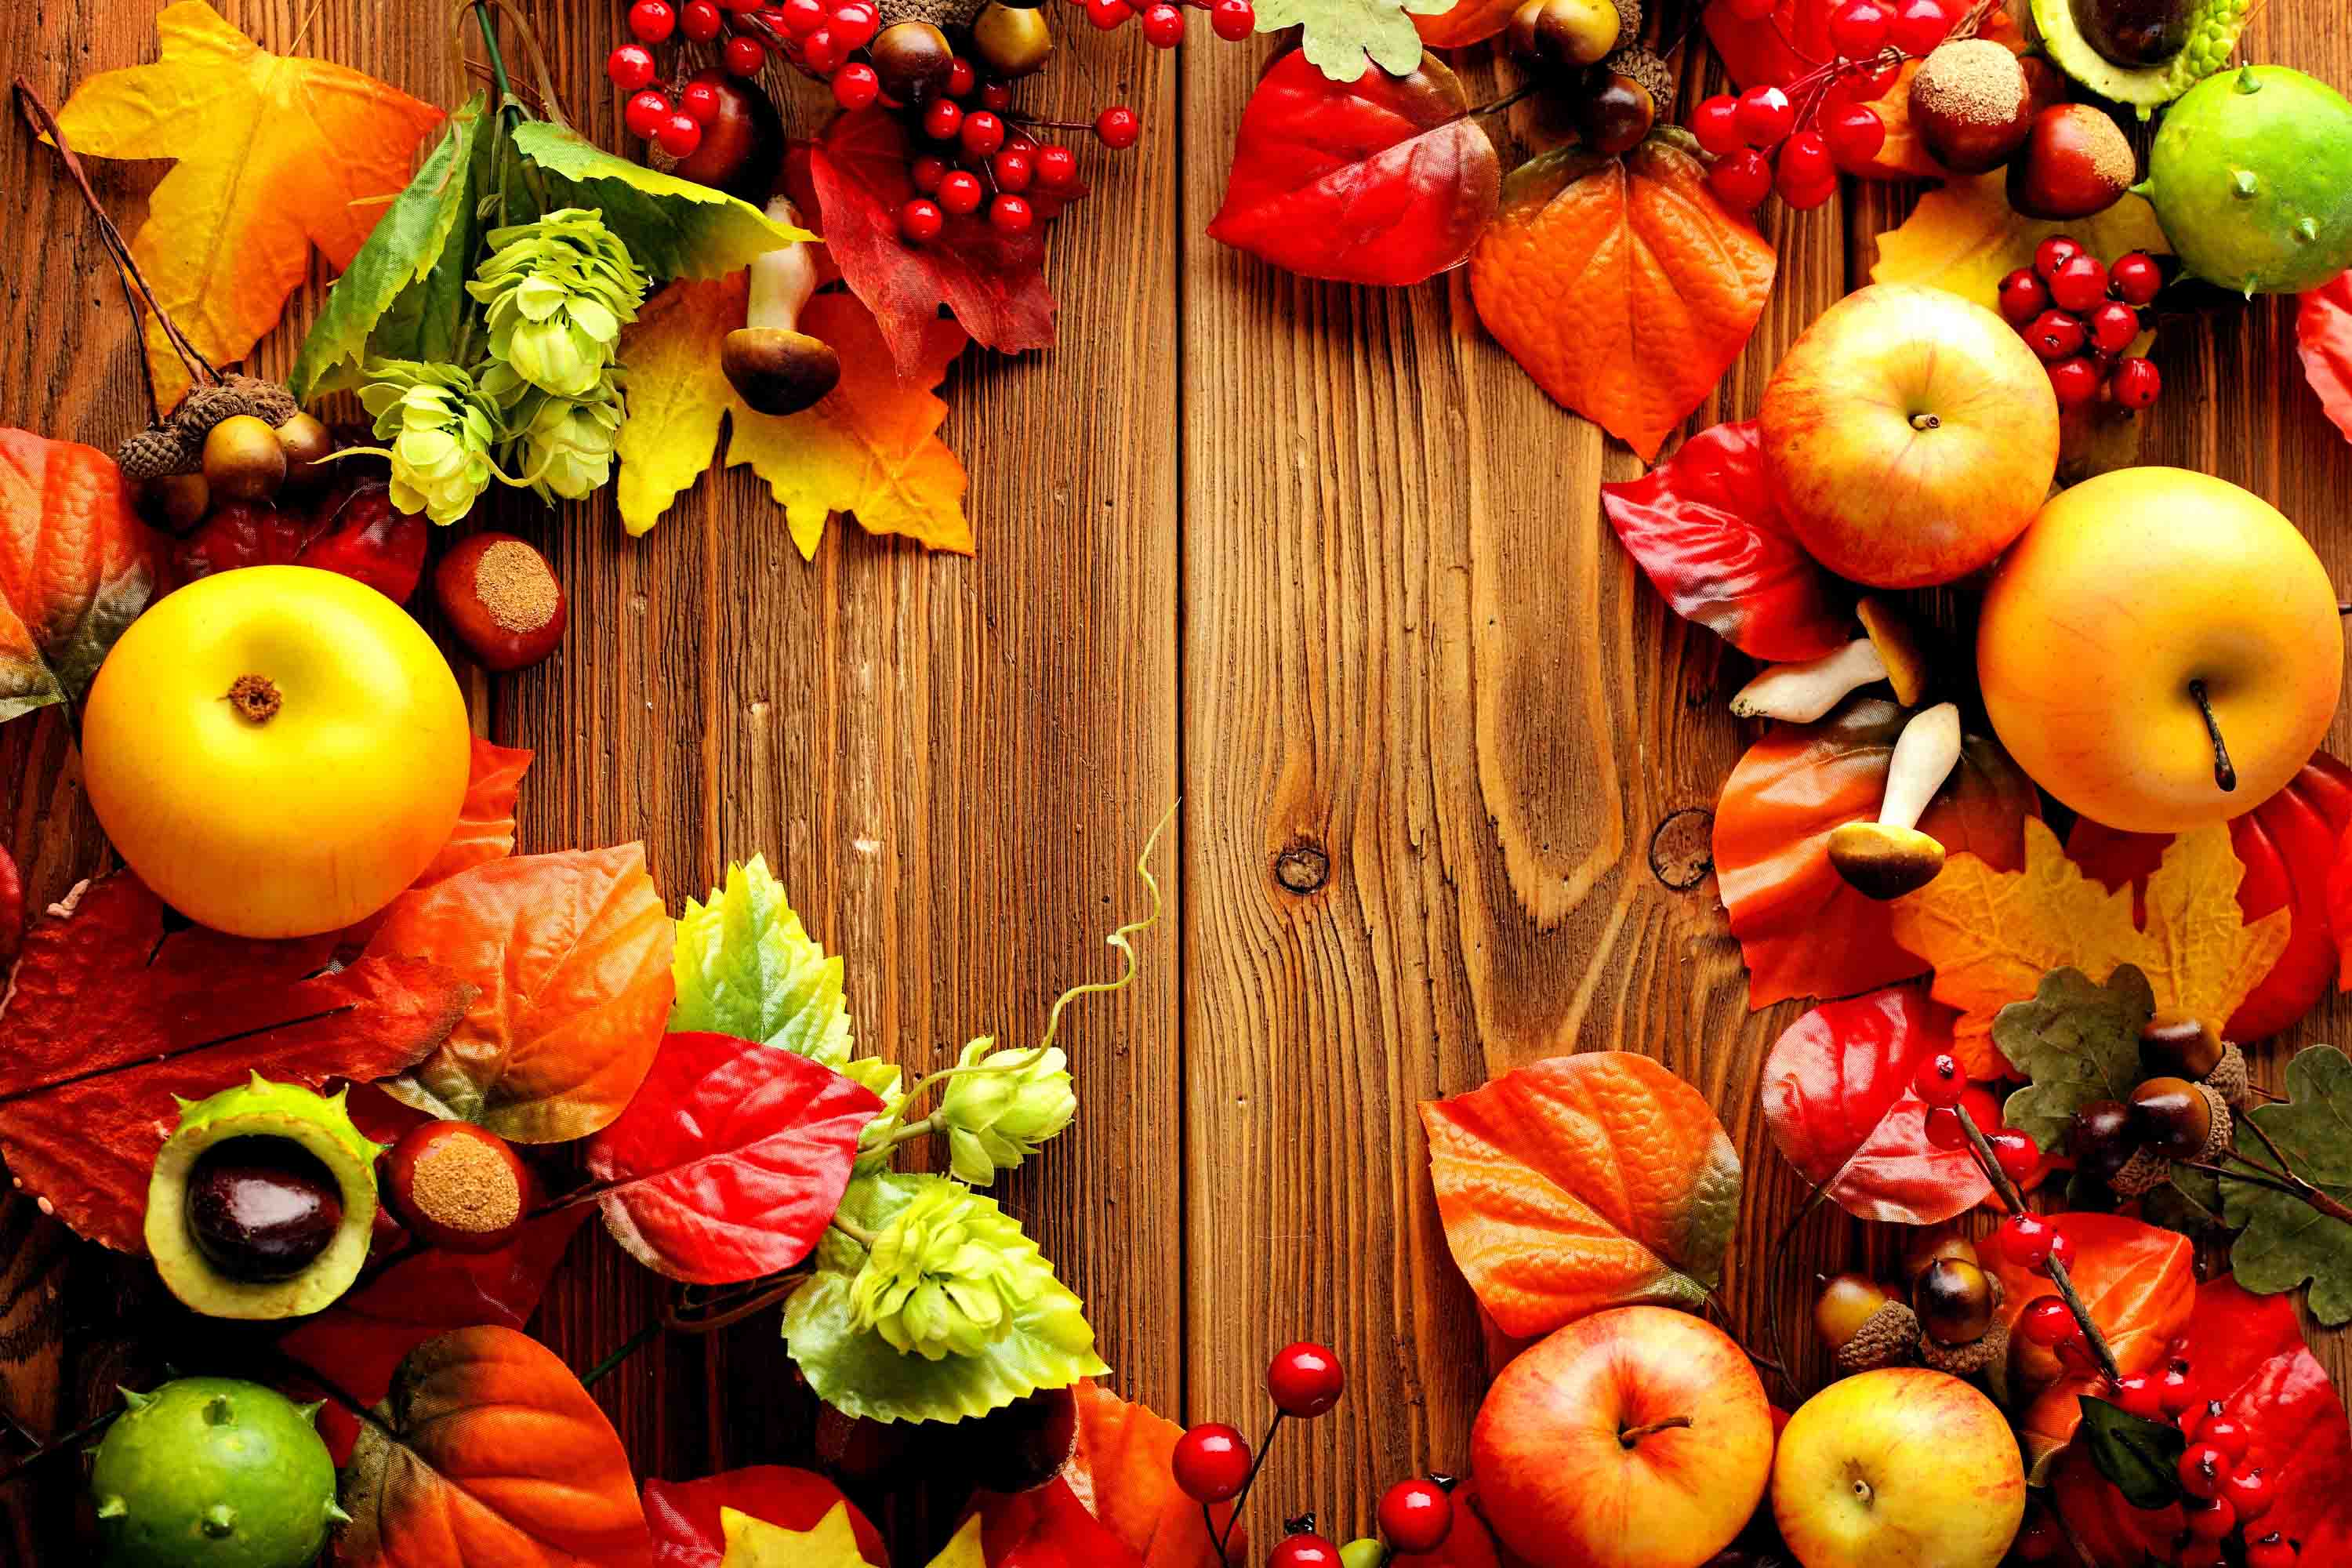 Thanksgiving Day Wallpapers